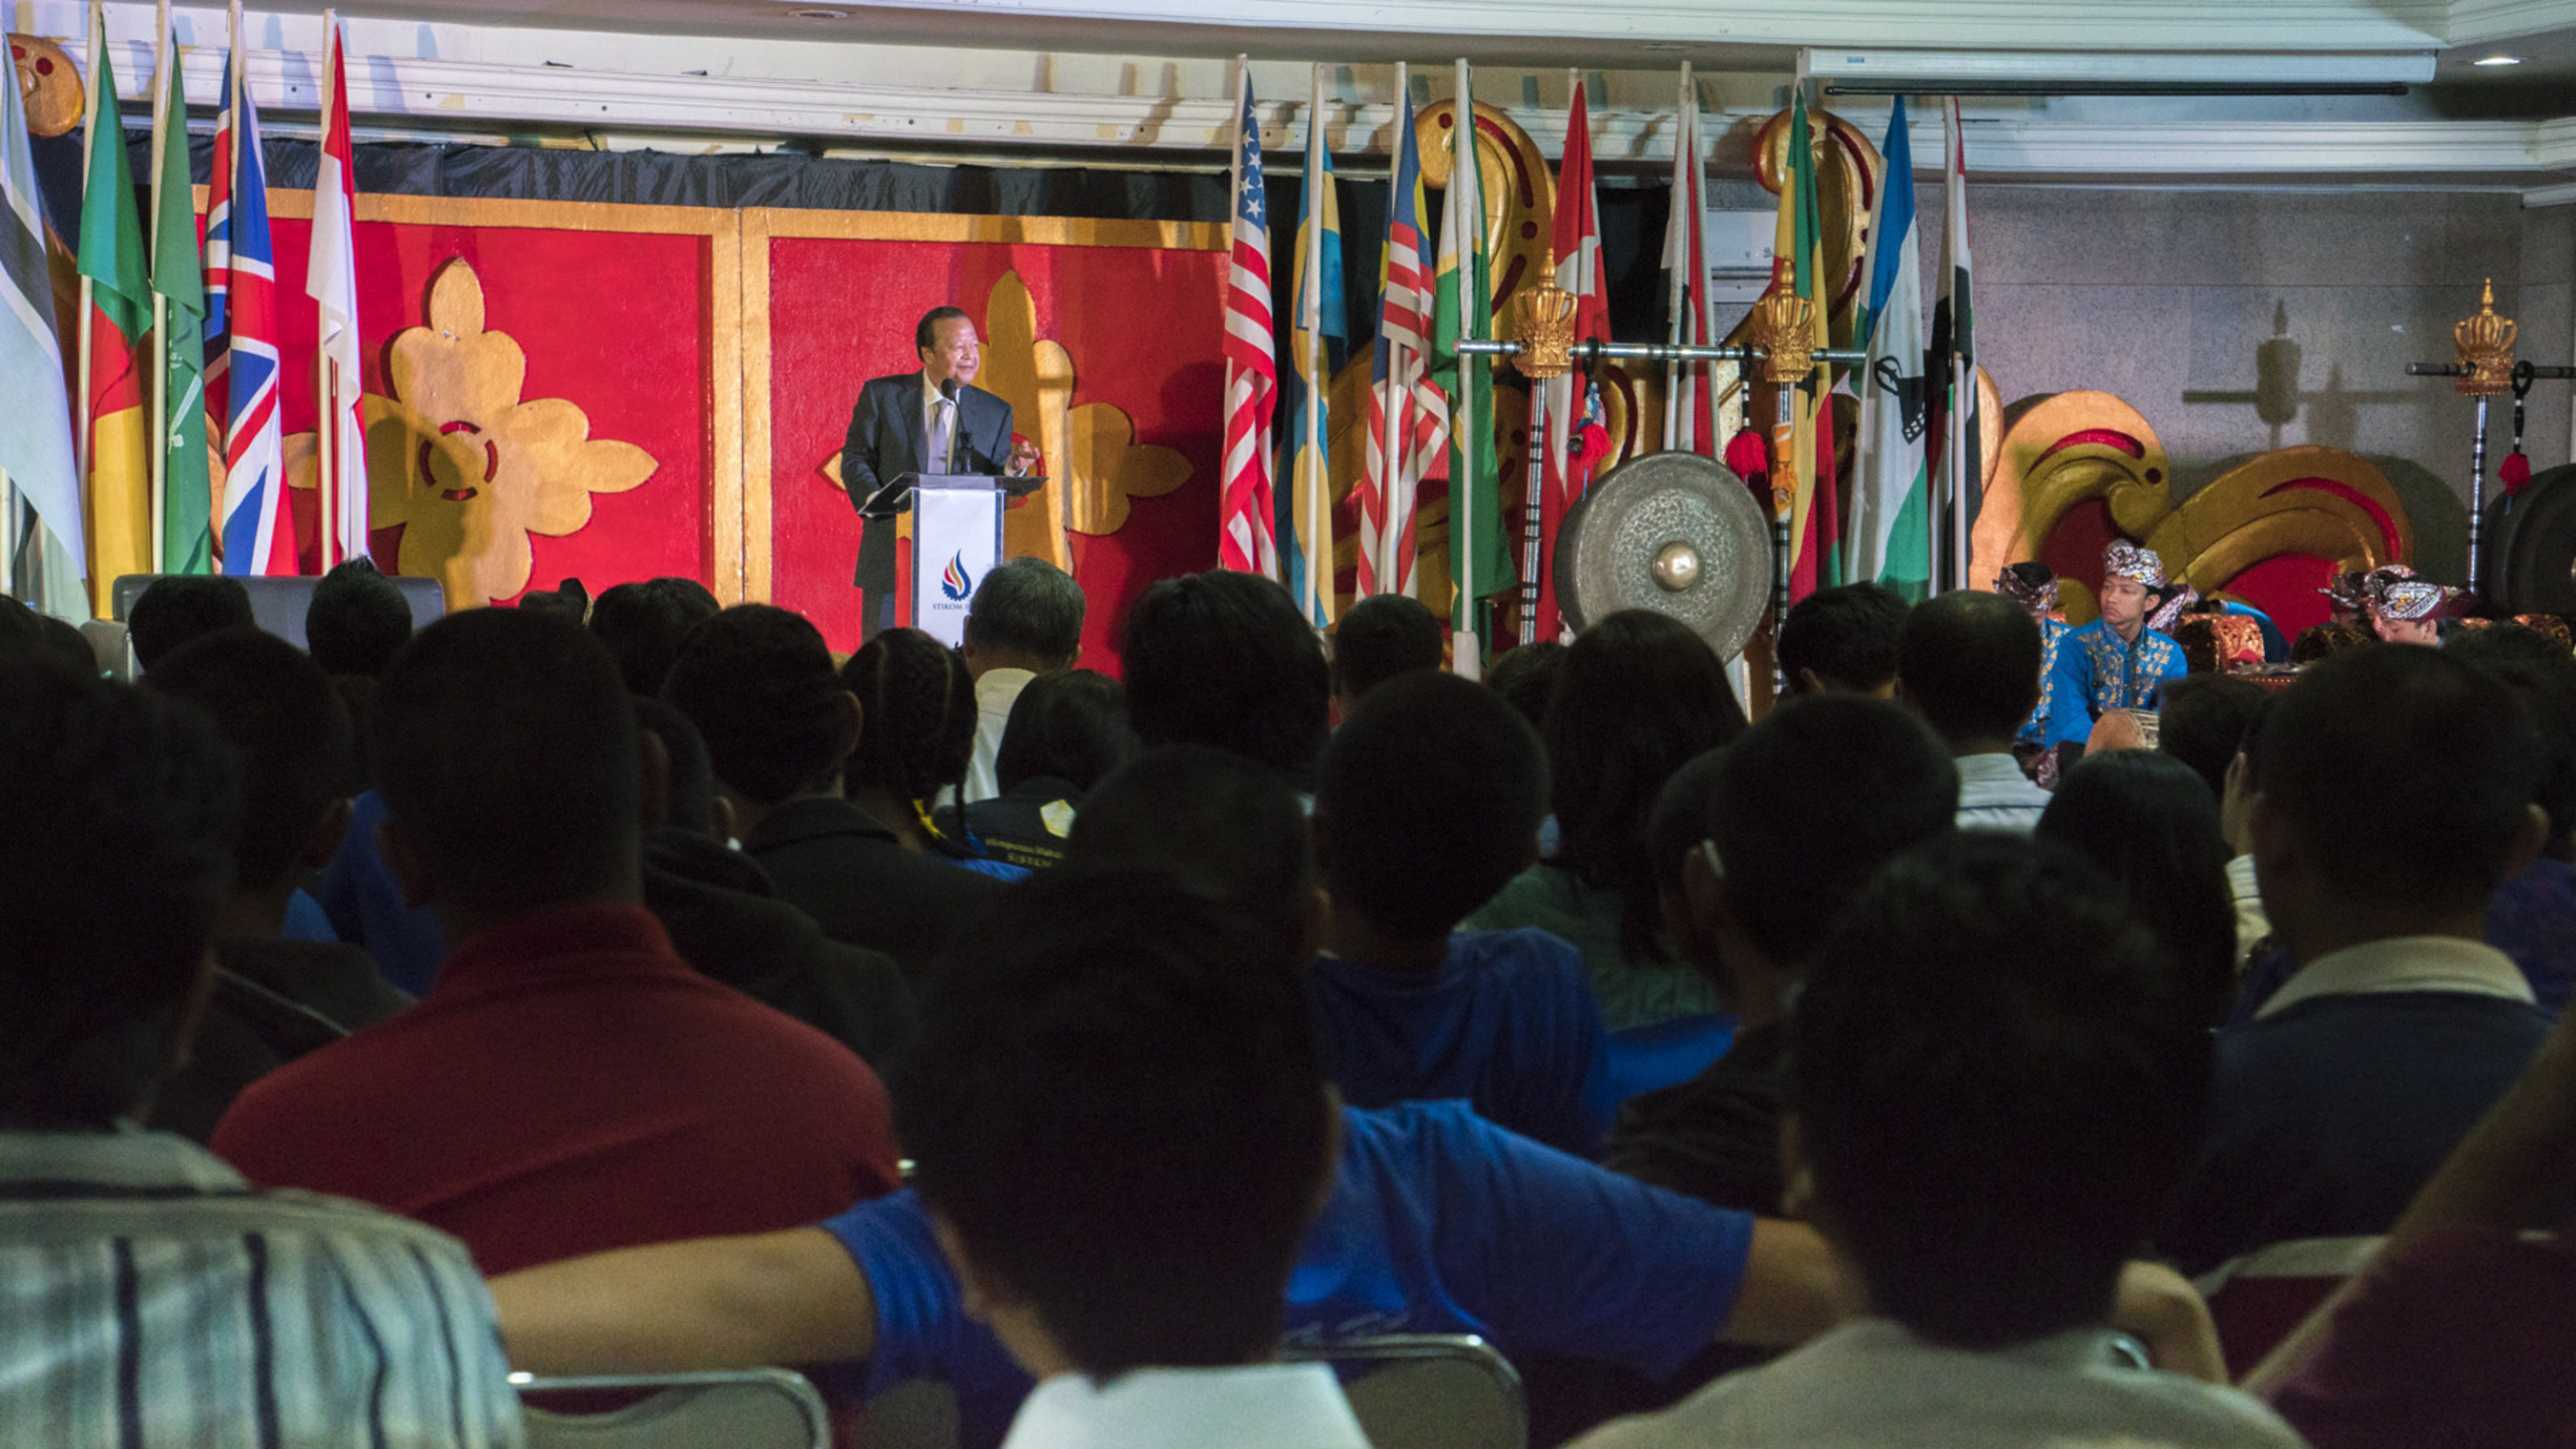 Speaking to university students in Indonesia and Malaysia, Prem Rawat emphasized that people have the power to find peace in their own lives despite immense societal challenges.